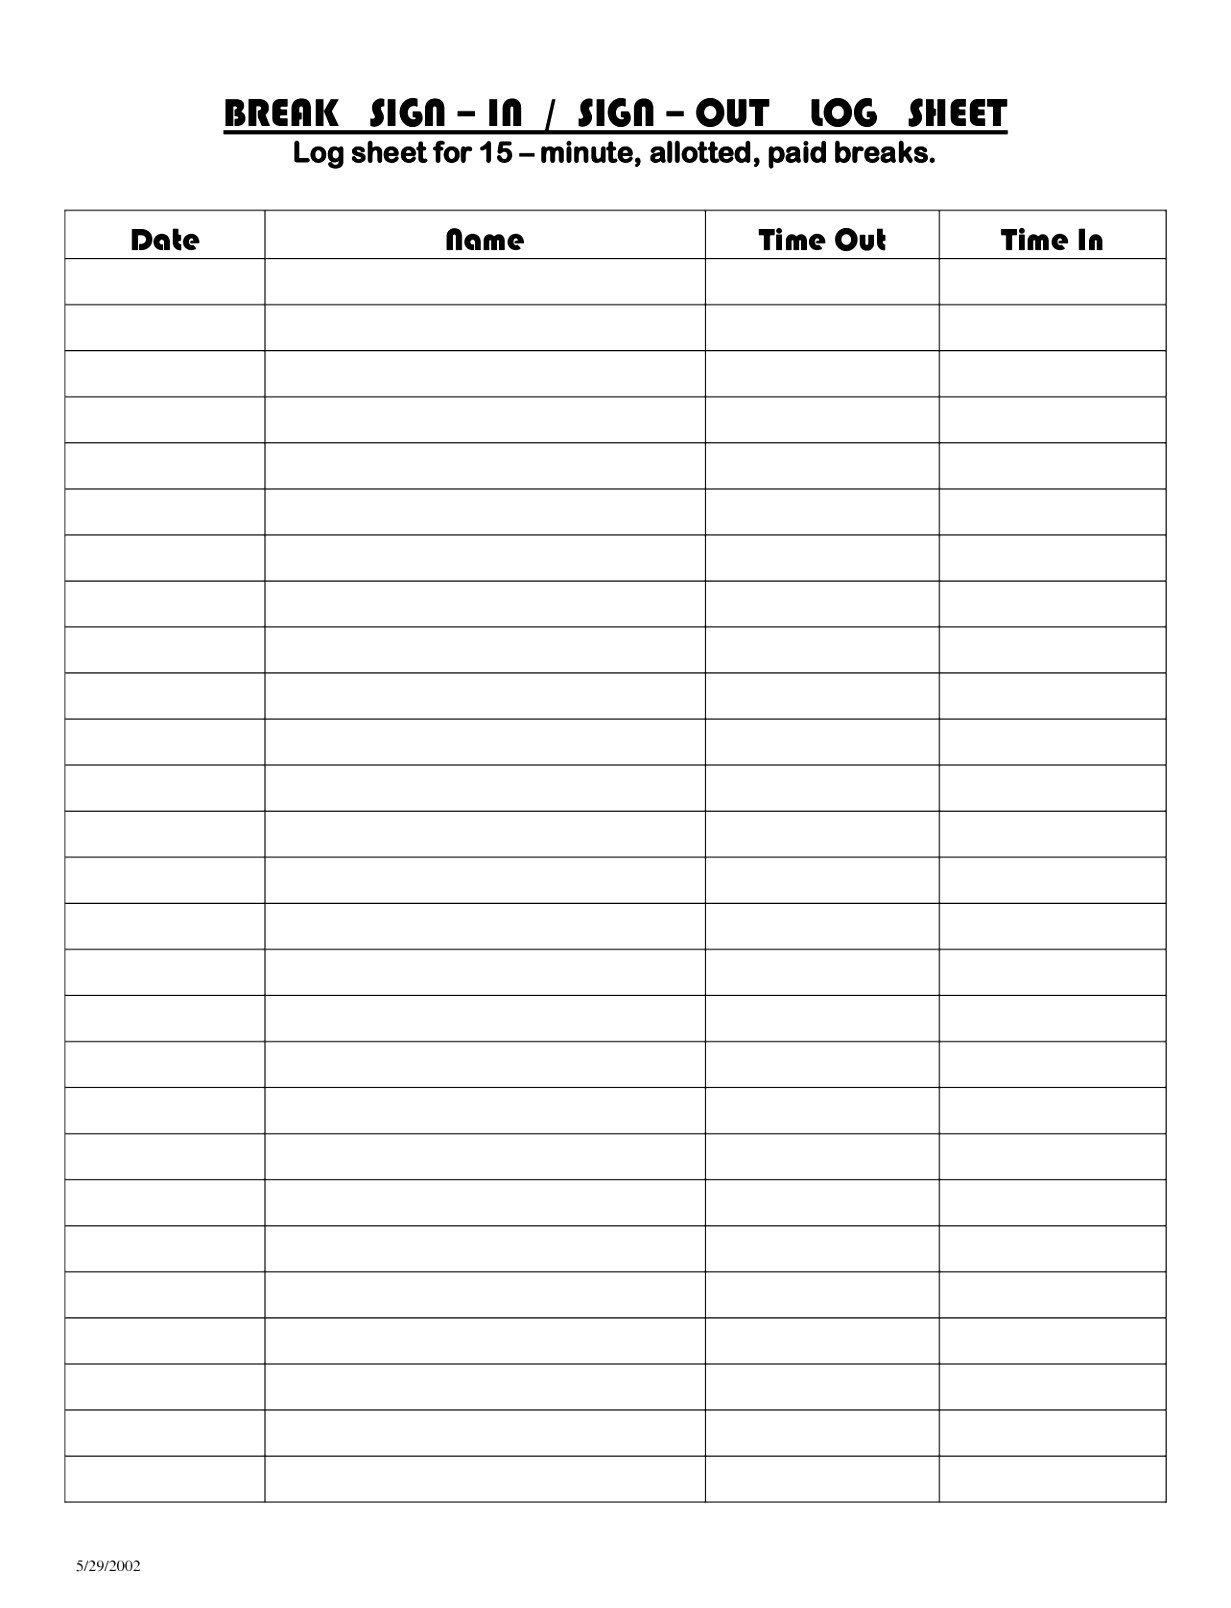 event sign in sheet template